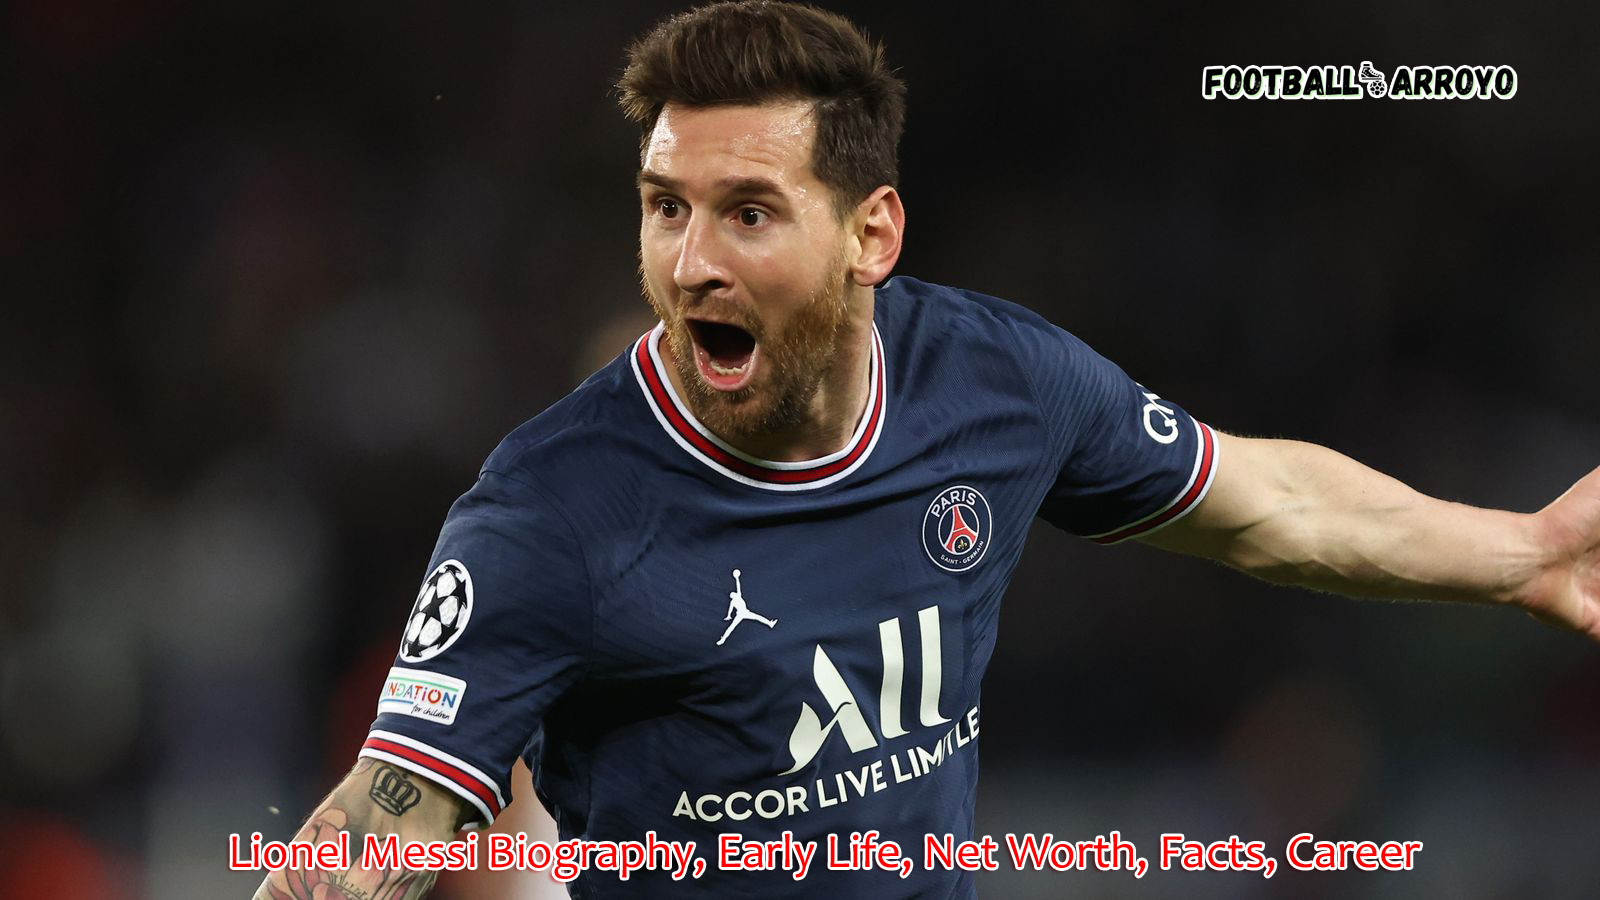 Lionel Messi Biography, Early Life, Net Worth, Facts, Career